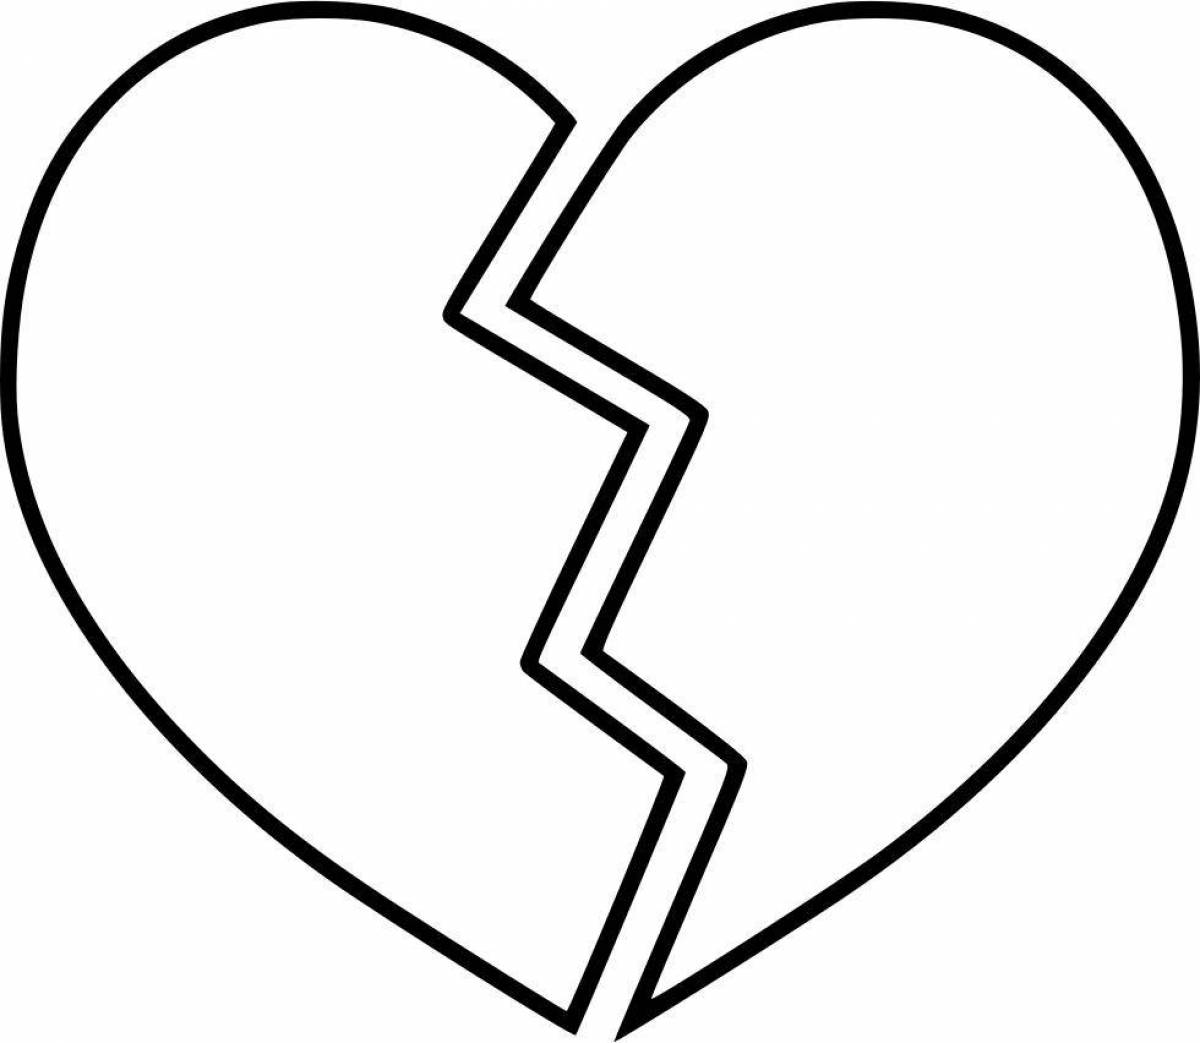 Awesome coloring pages with hearts